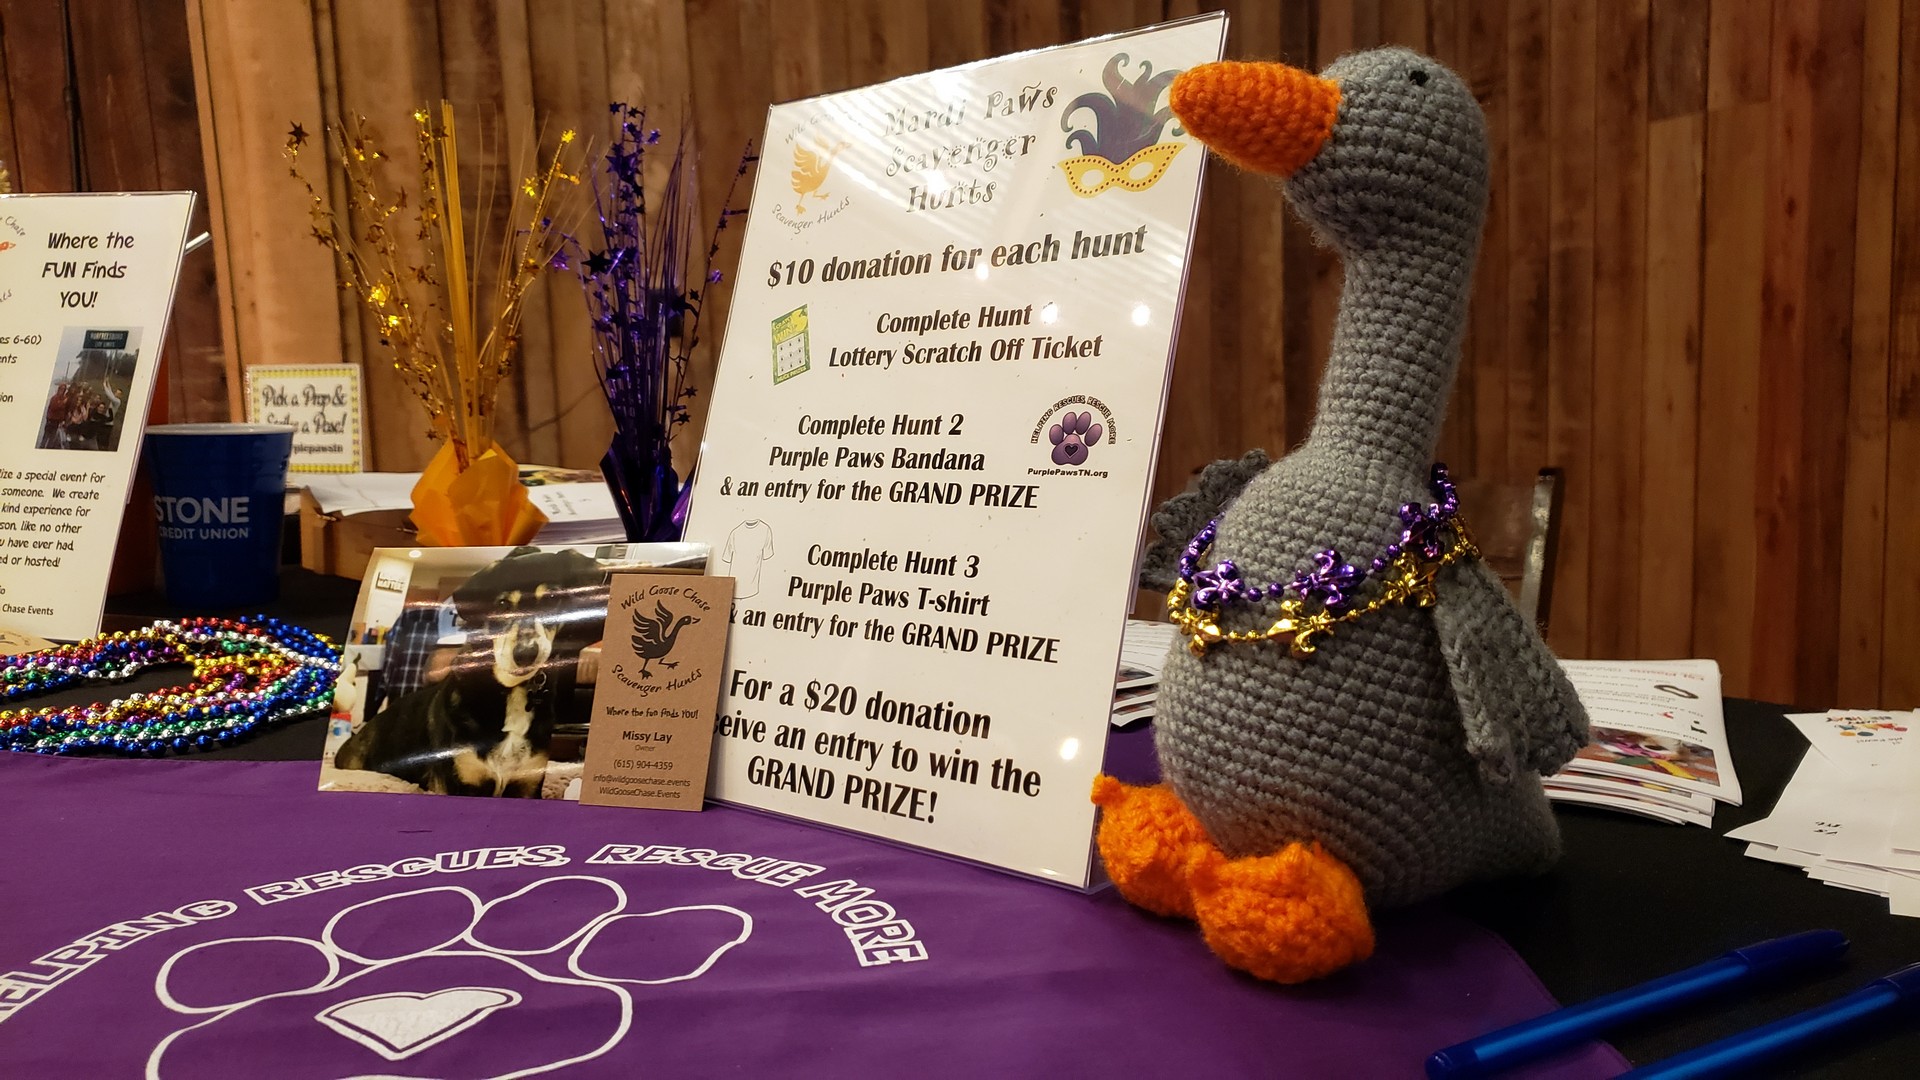 a table at Mardi Paws 2019 decorated with purple table cloth, a stuffed animal goose, and the night's schedule